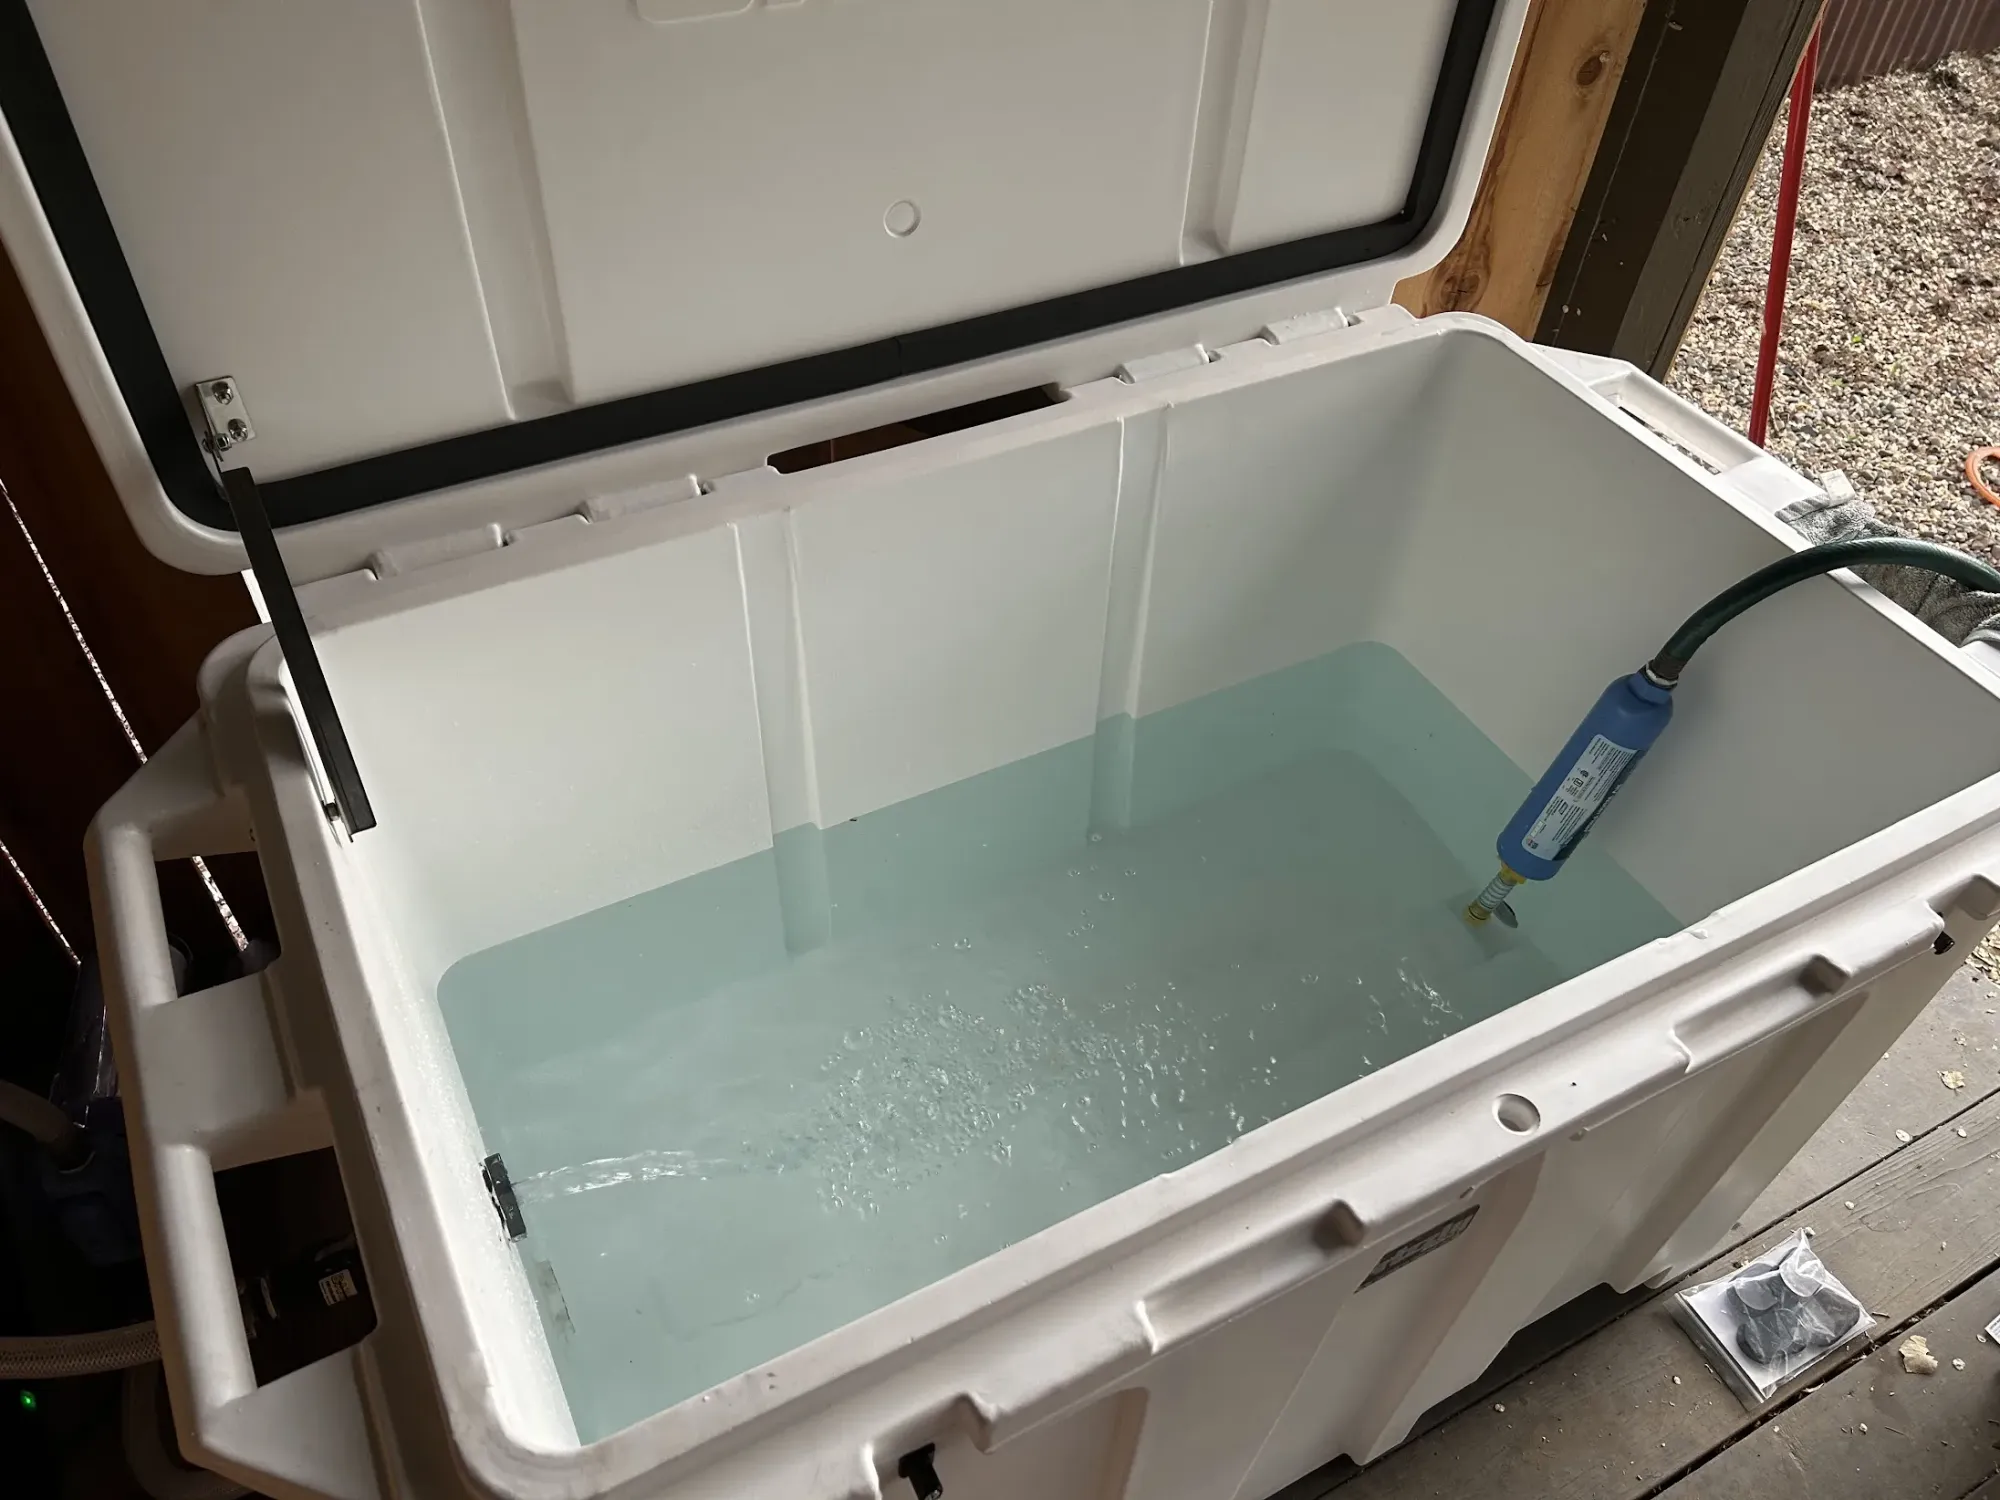 Cold Plunge is as easy as filling your tub. ❄️, Video published by NüFox